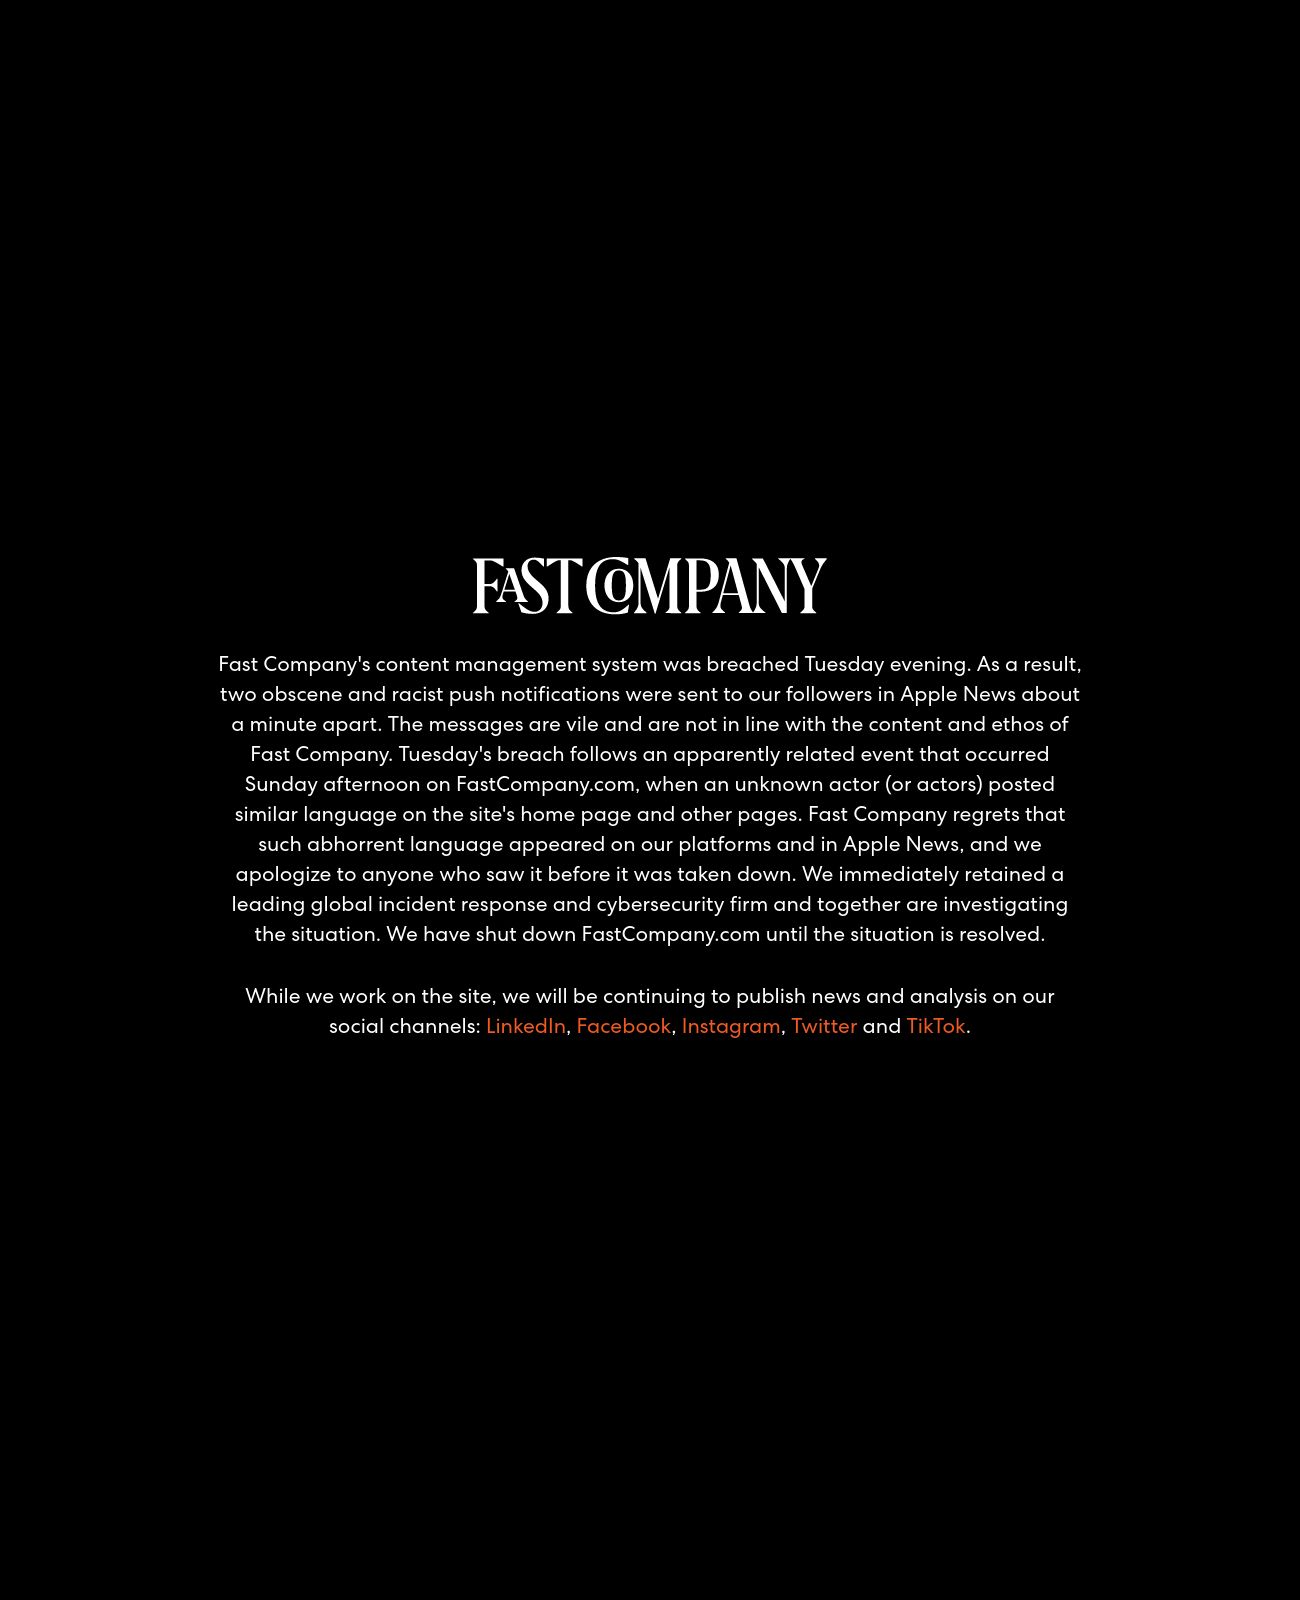 Fast Company at 2022-10-03 02:03:23-04:00 local time